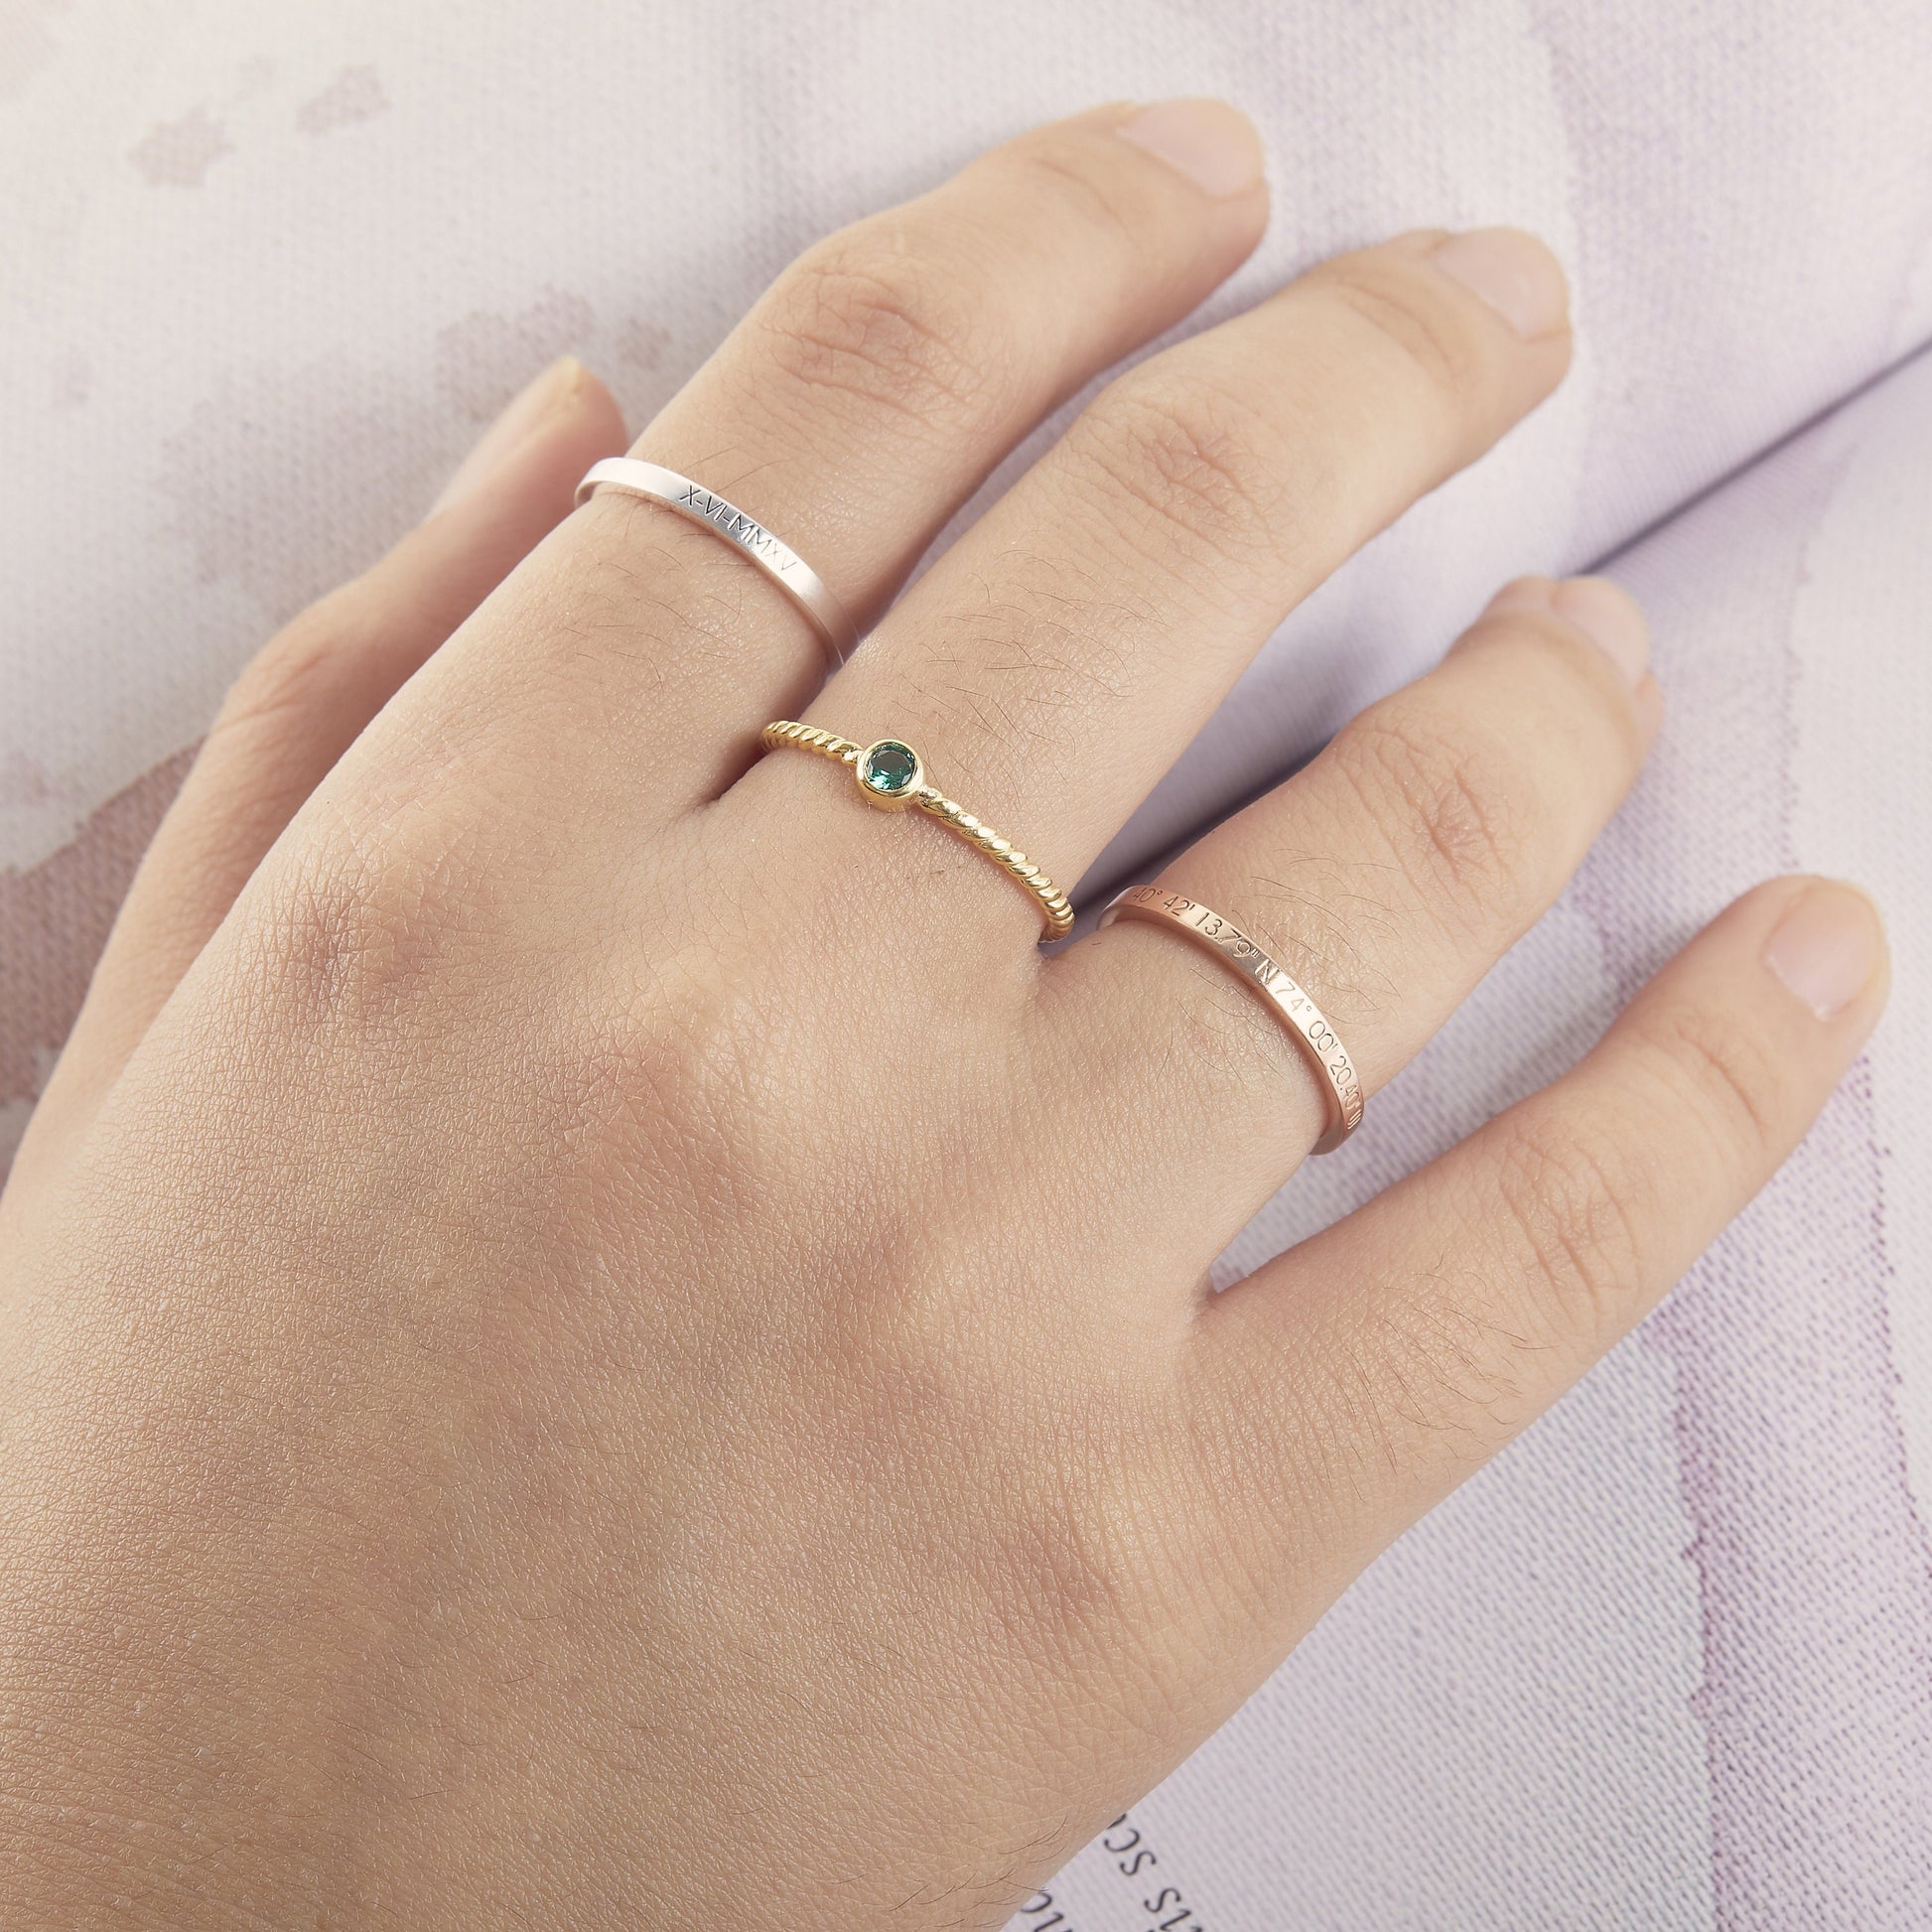 Birthstone Ring | Gemstone Ring | Birthstone Jewelry | Stacking Ring | Personalized  Stackable Ring | Family Ring | Dainty Promise Ring